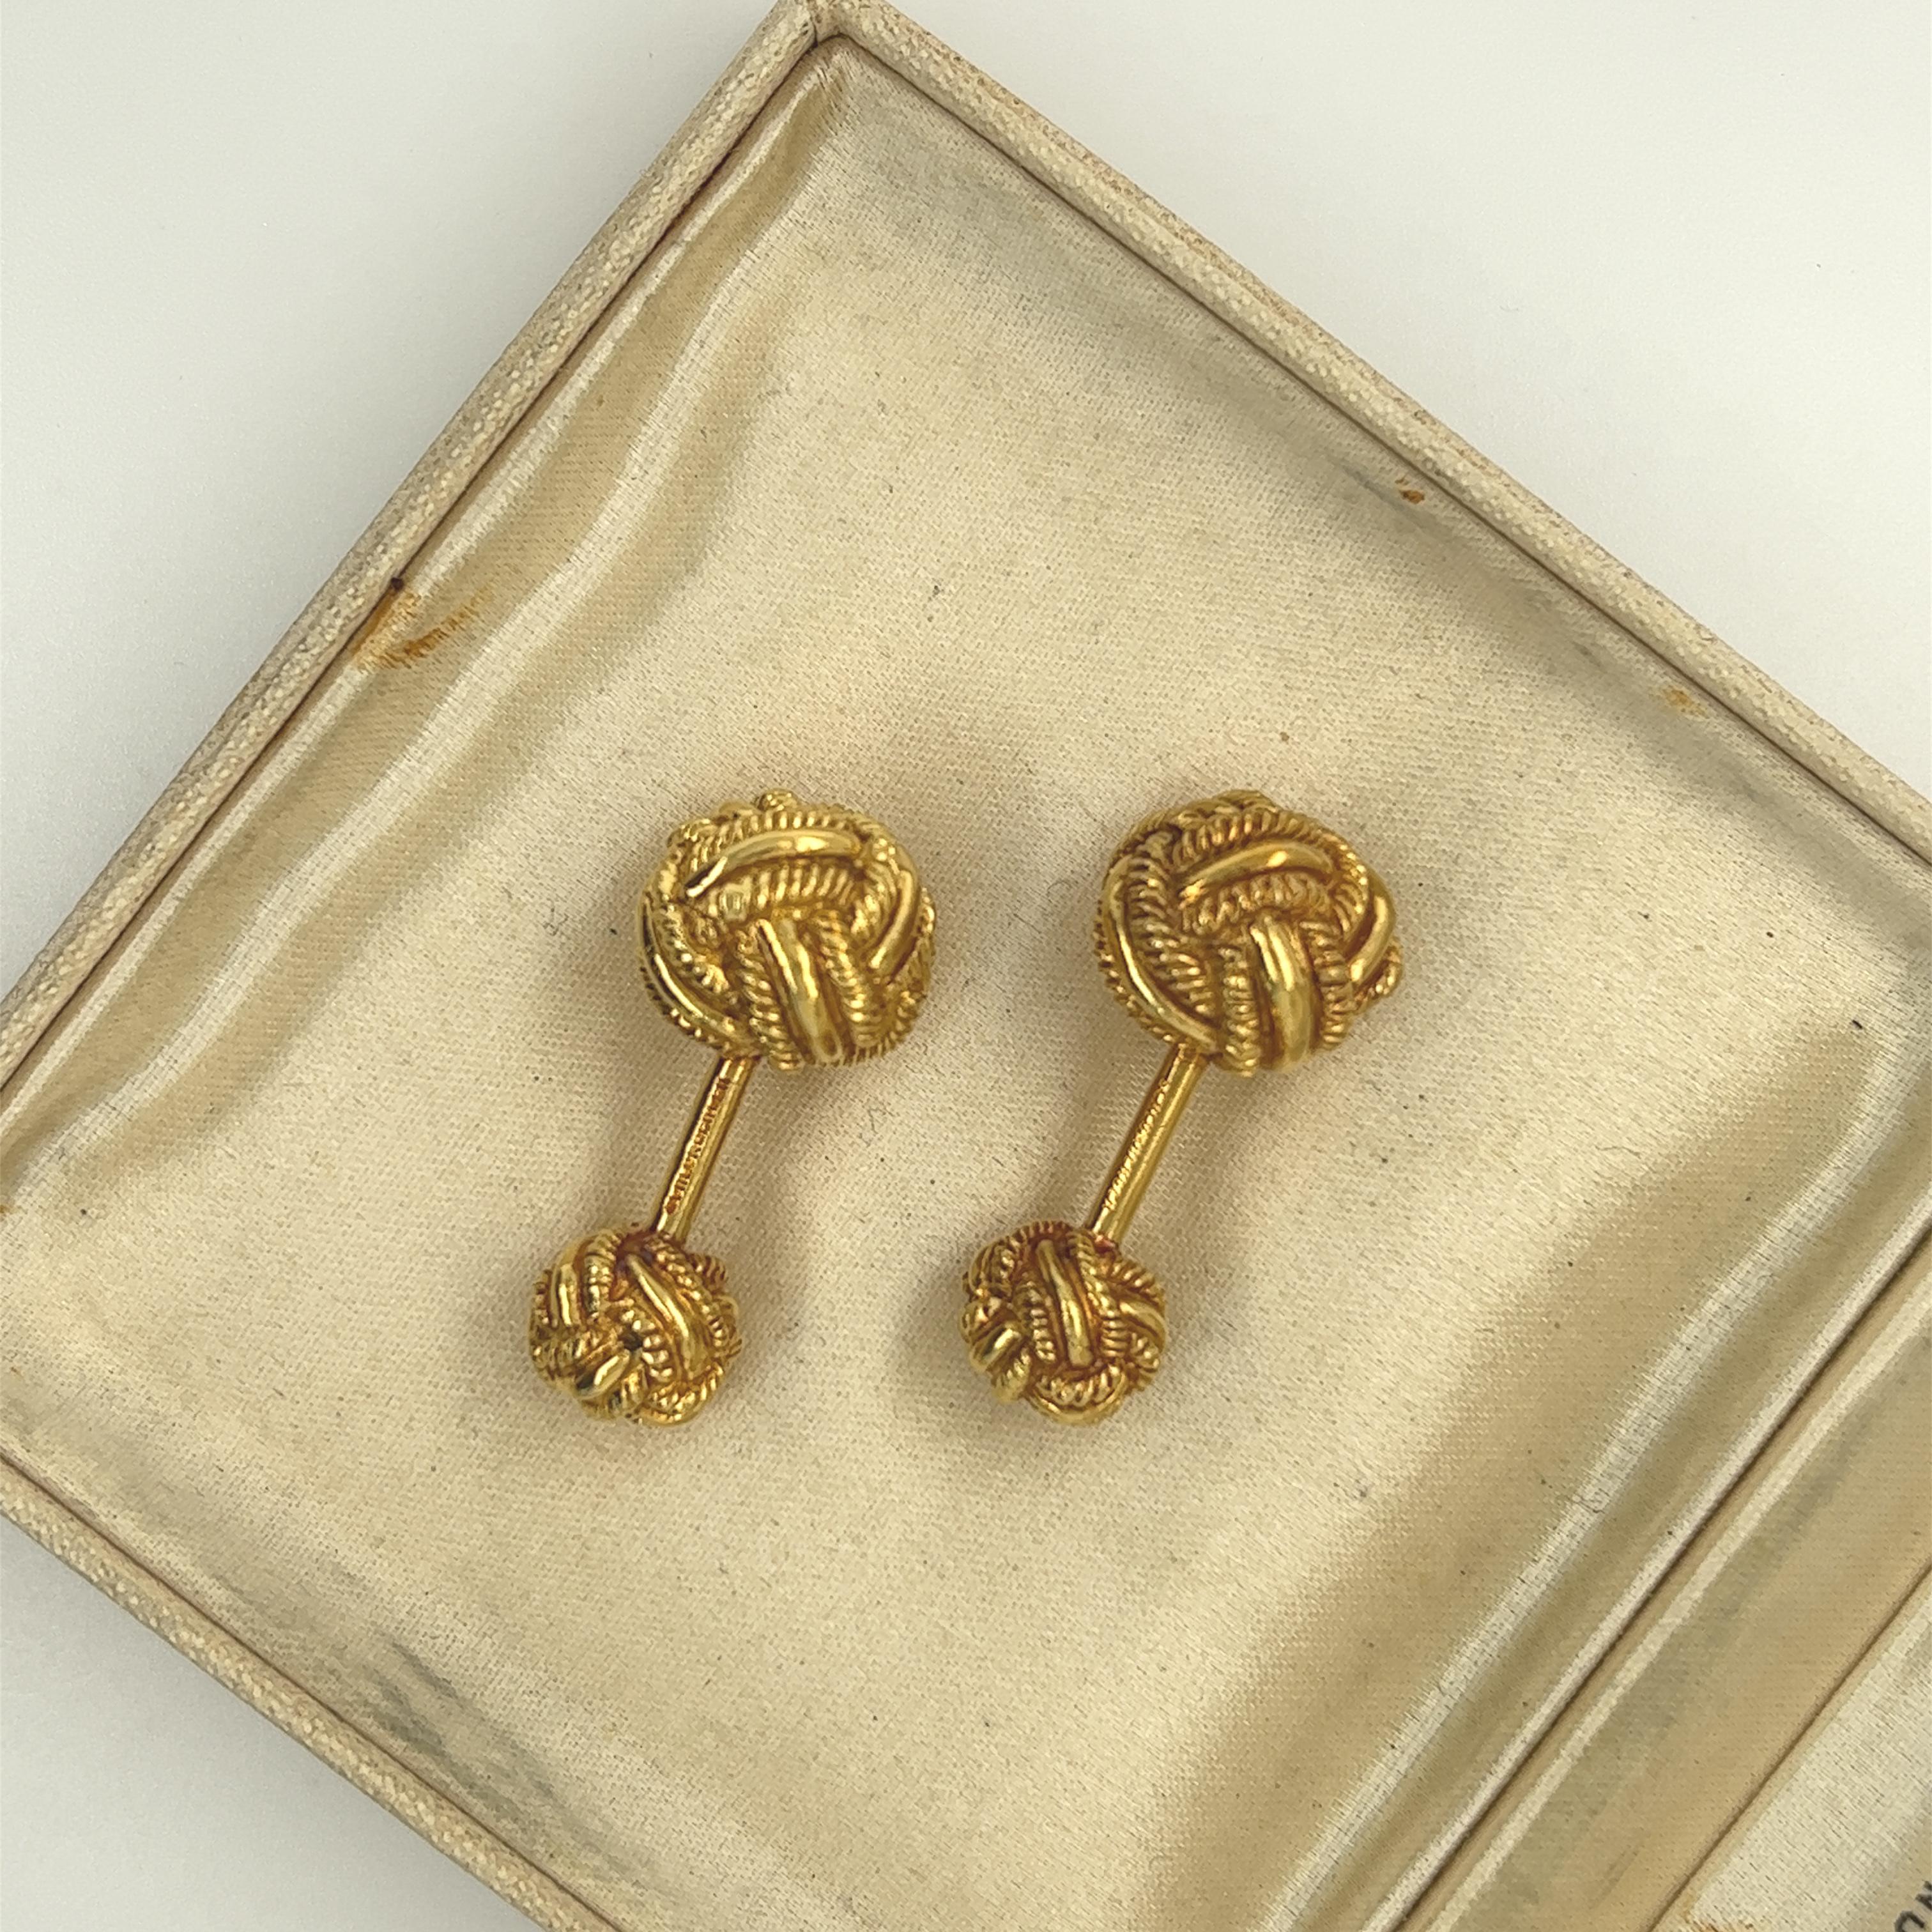 Retro Tiffany & Co. Schlumberger Woven Knot Cuff Links in 18k Yellow Gold